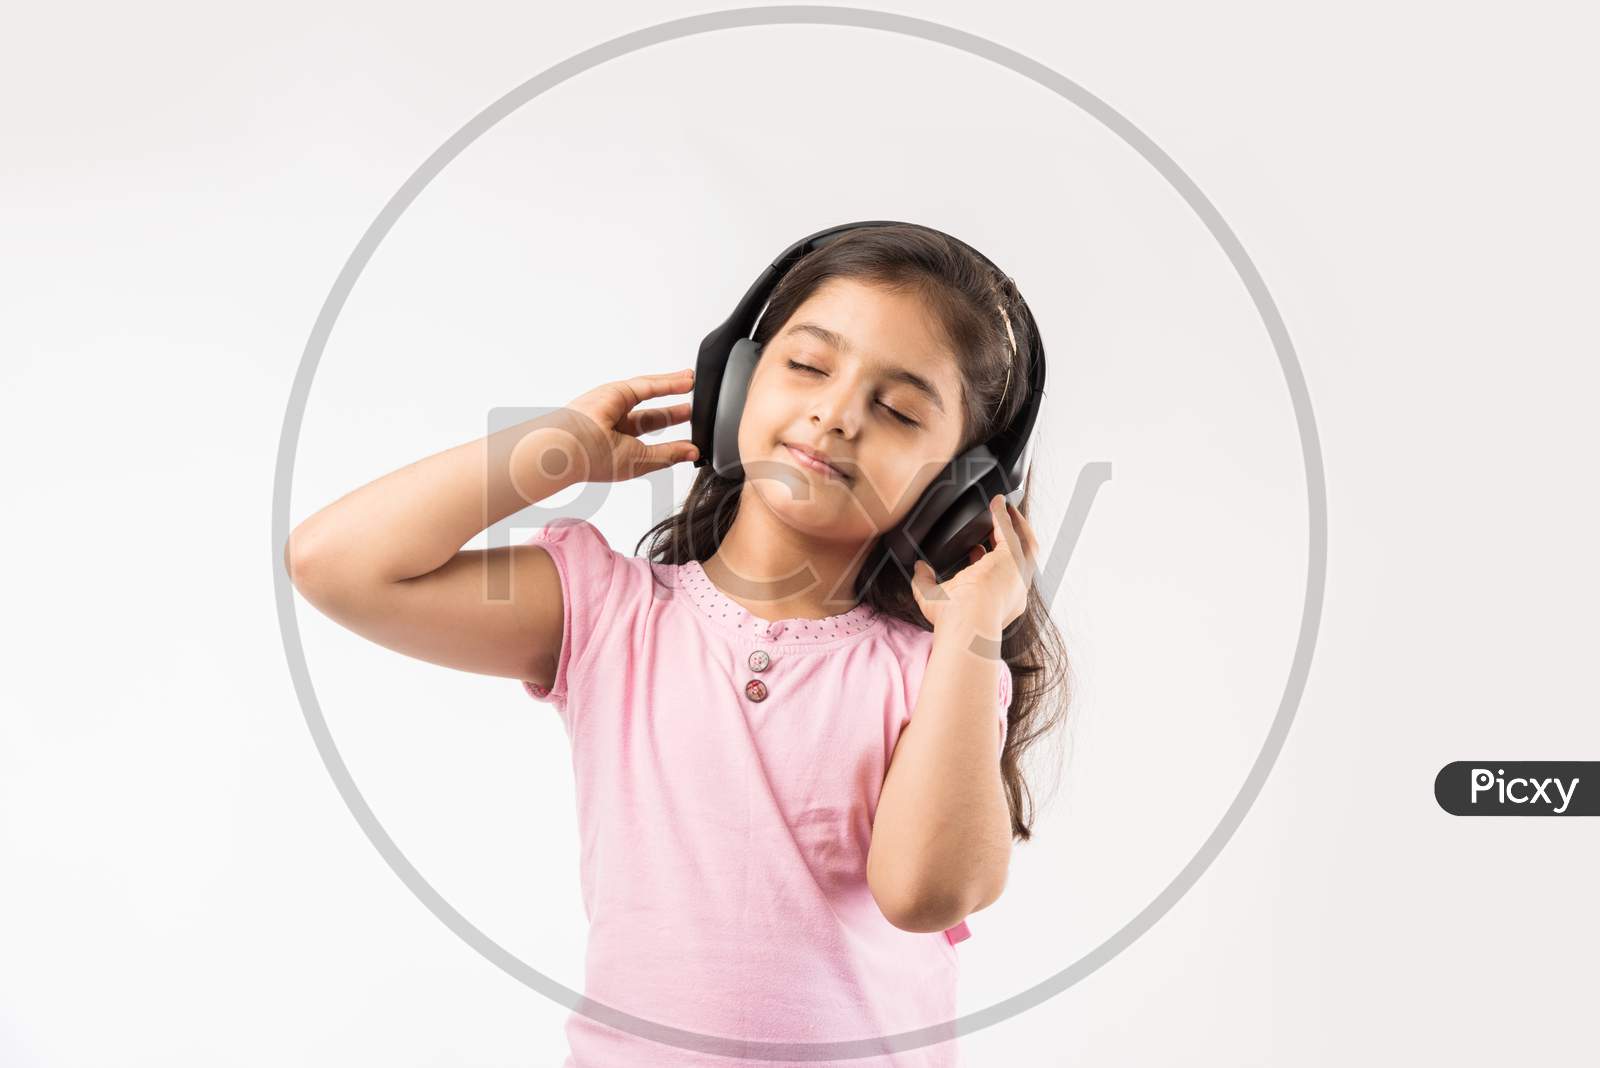 Cute Indian/asian small girl listening to music on wireless headphones isolated on white